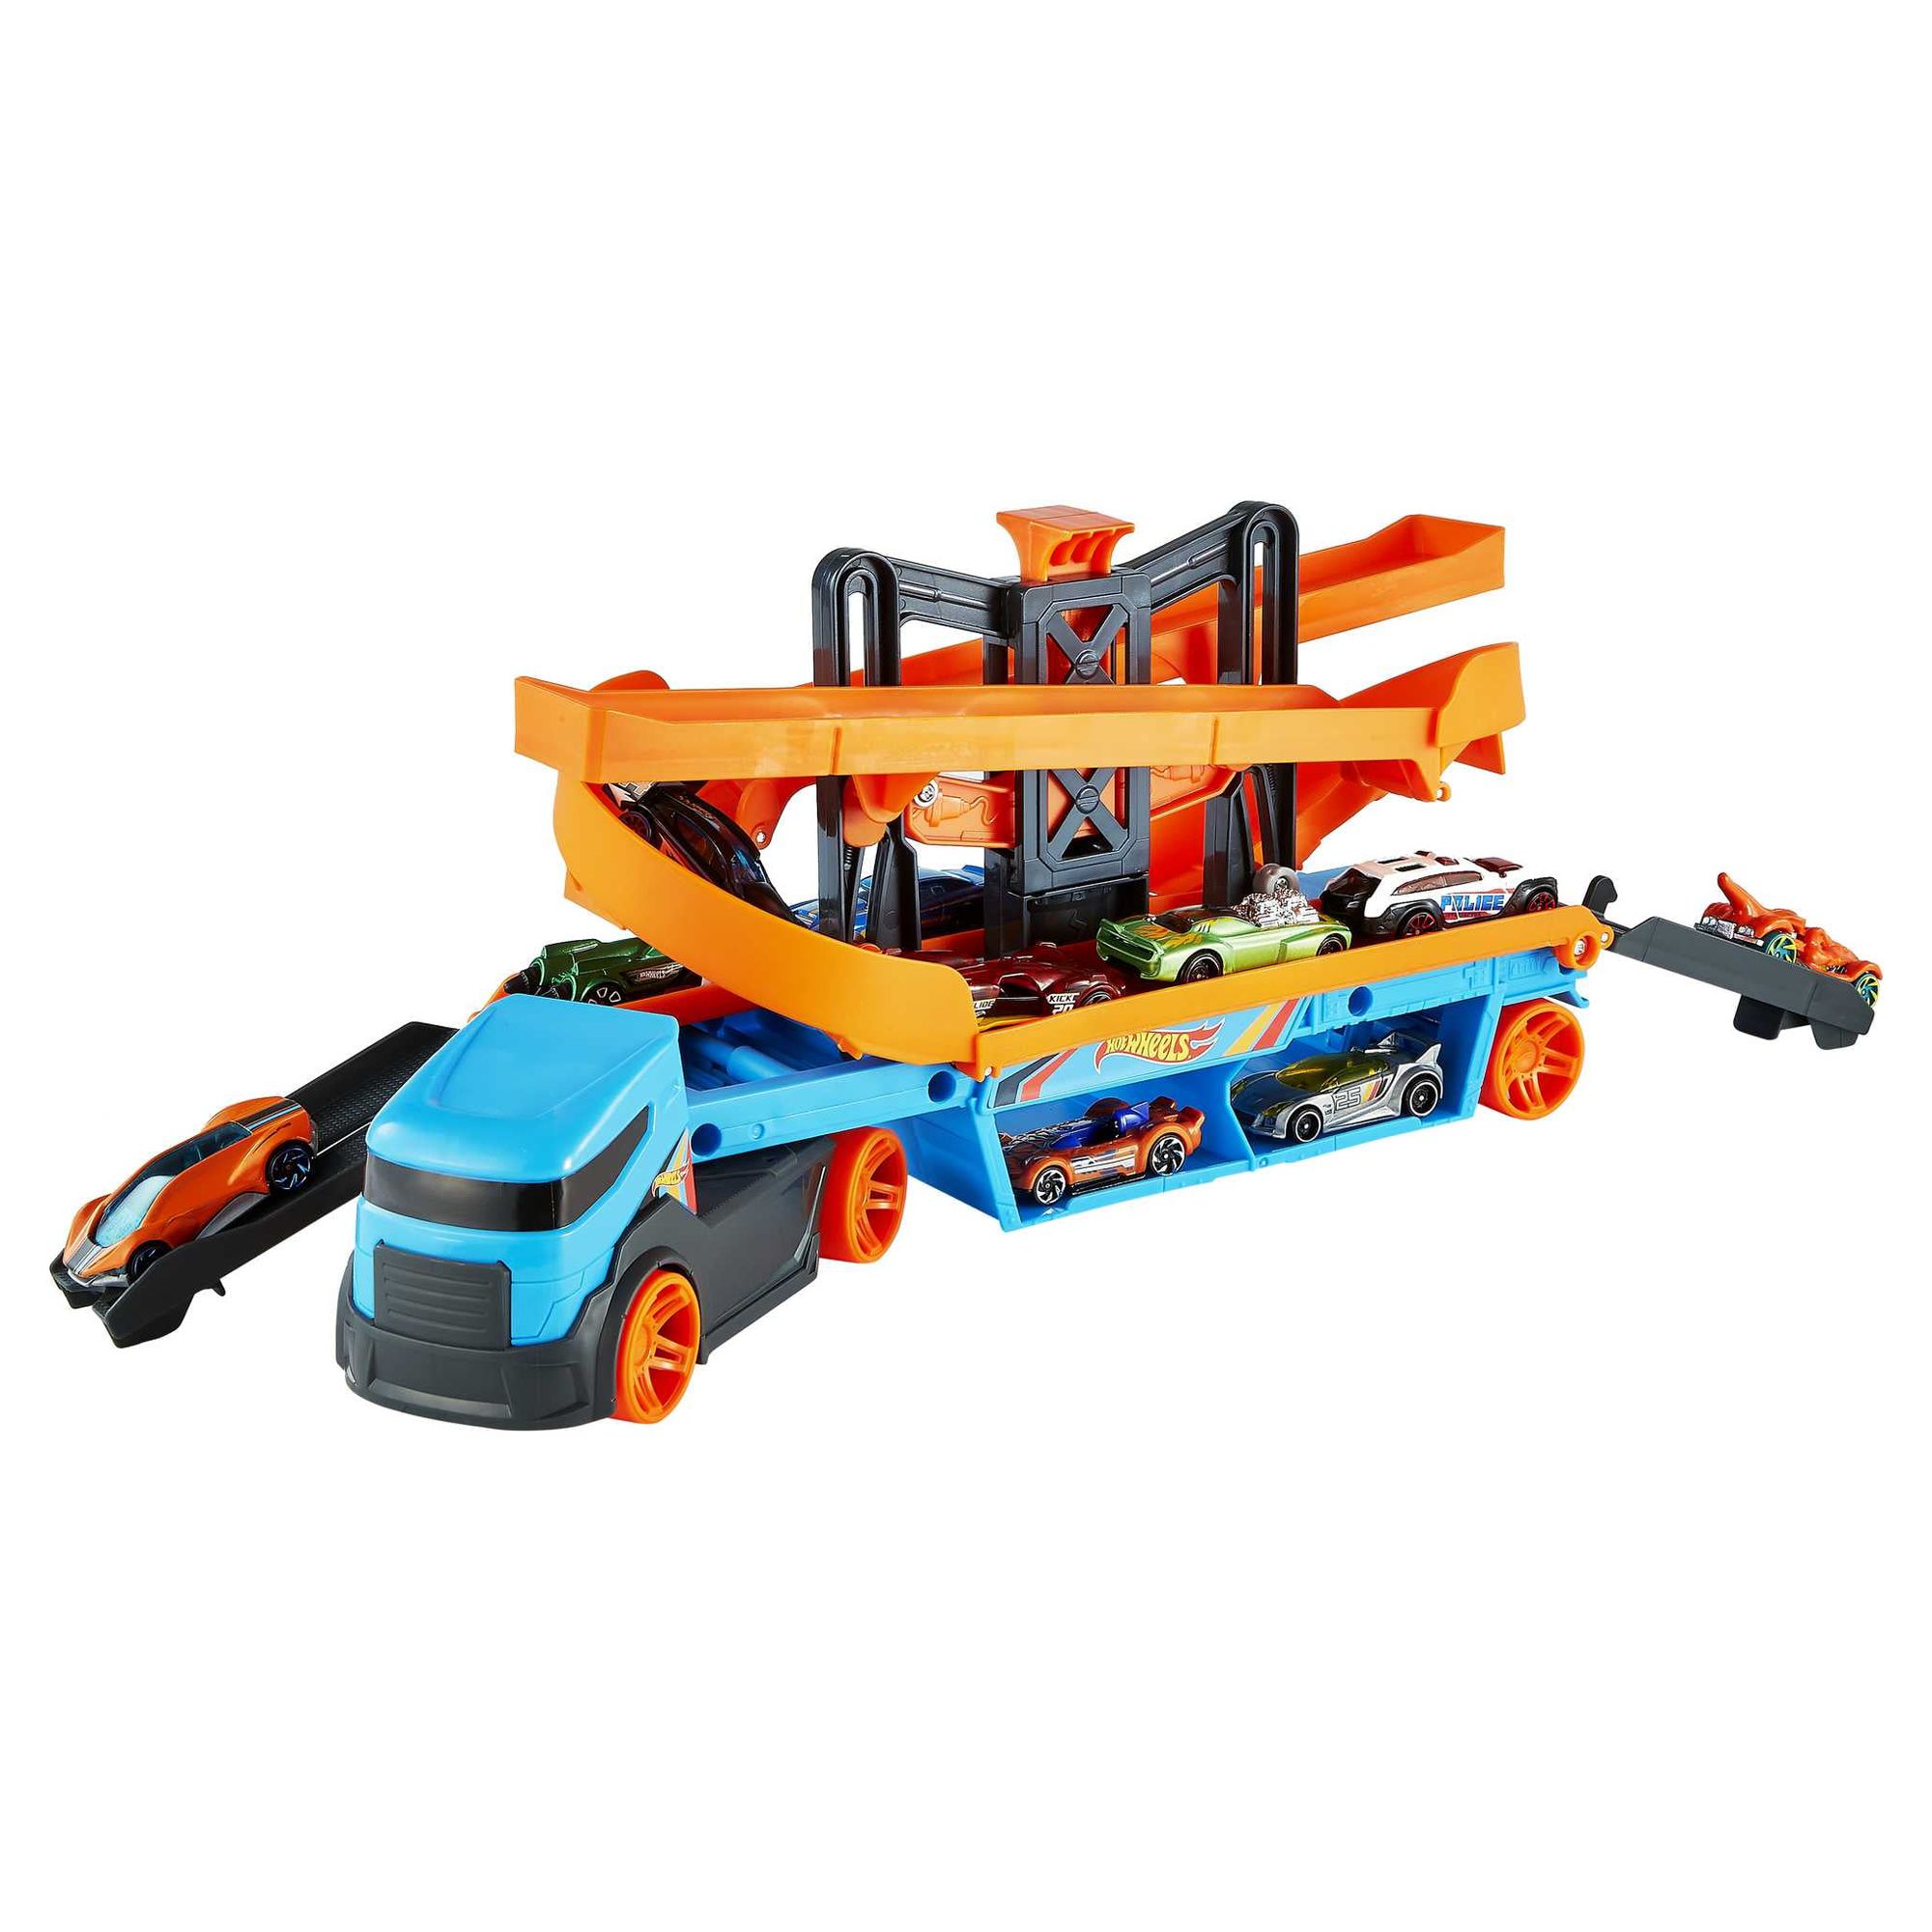 Hot Wheels Lift & Launch Hauler Toy Truck with 10 Cars in 1:64 Scale, Transporter Stores 20 Vehicles - image 4 of 6